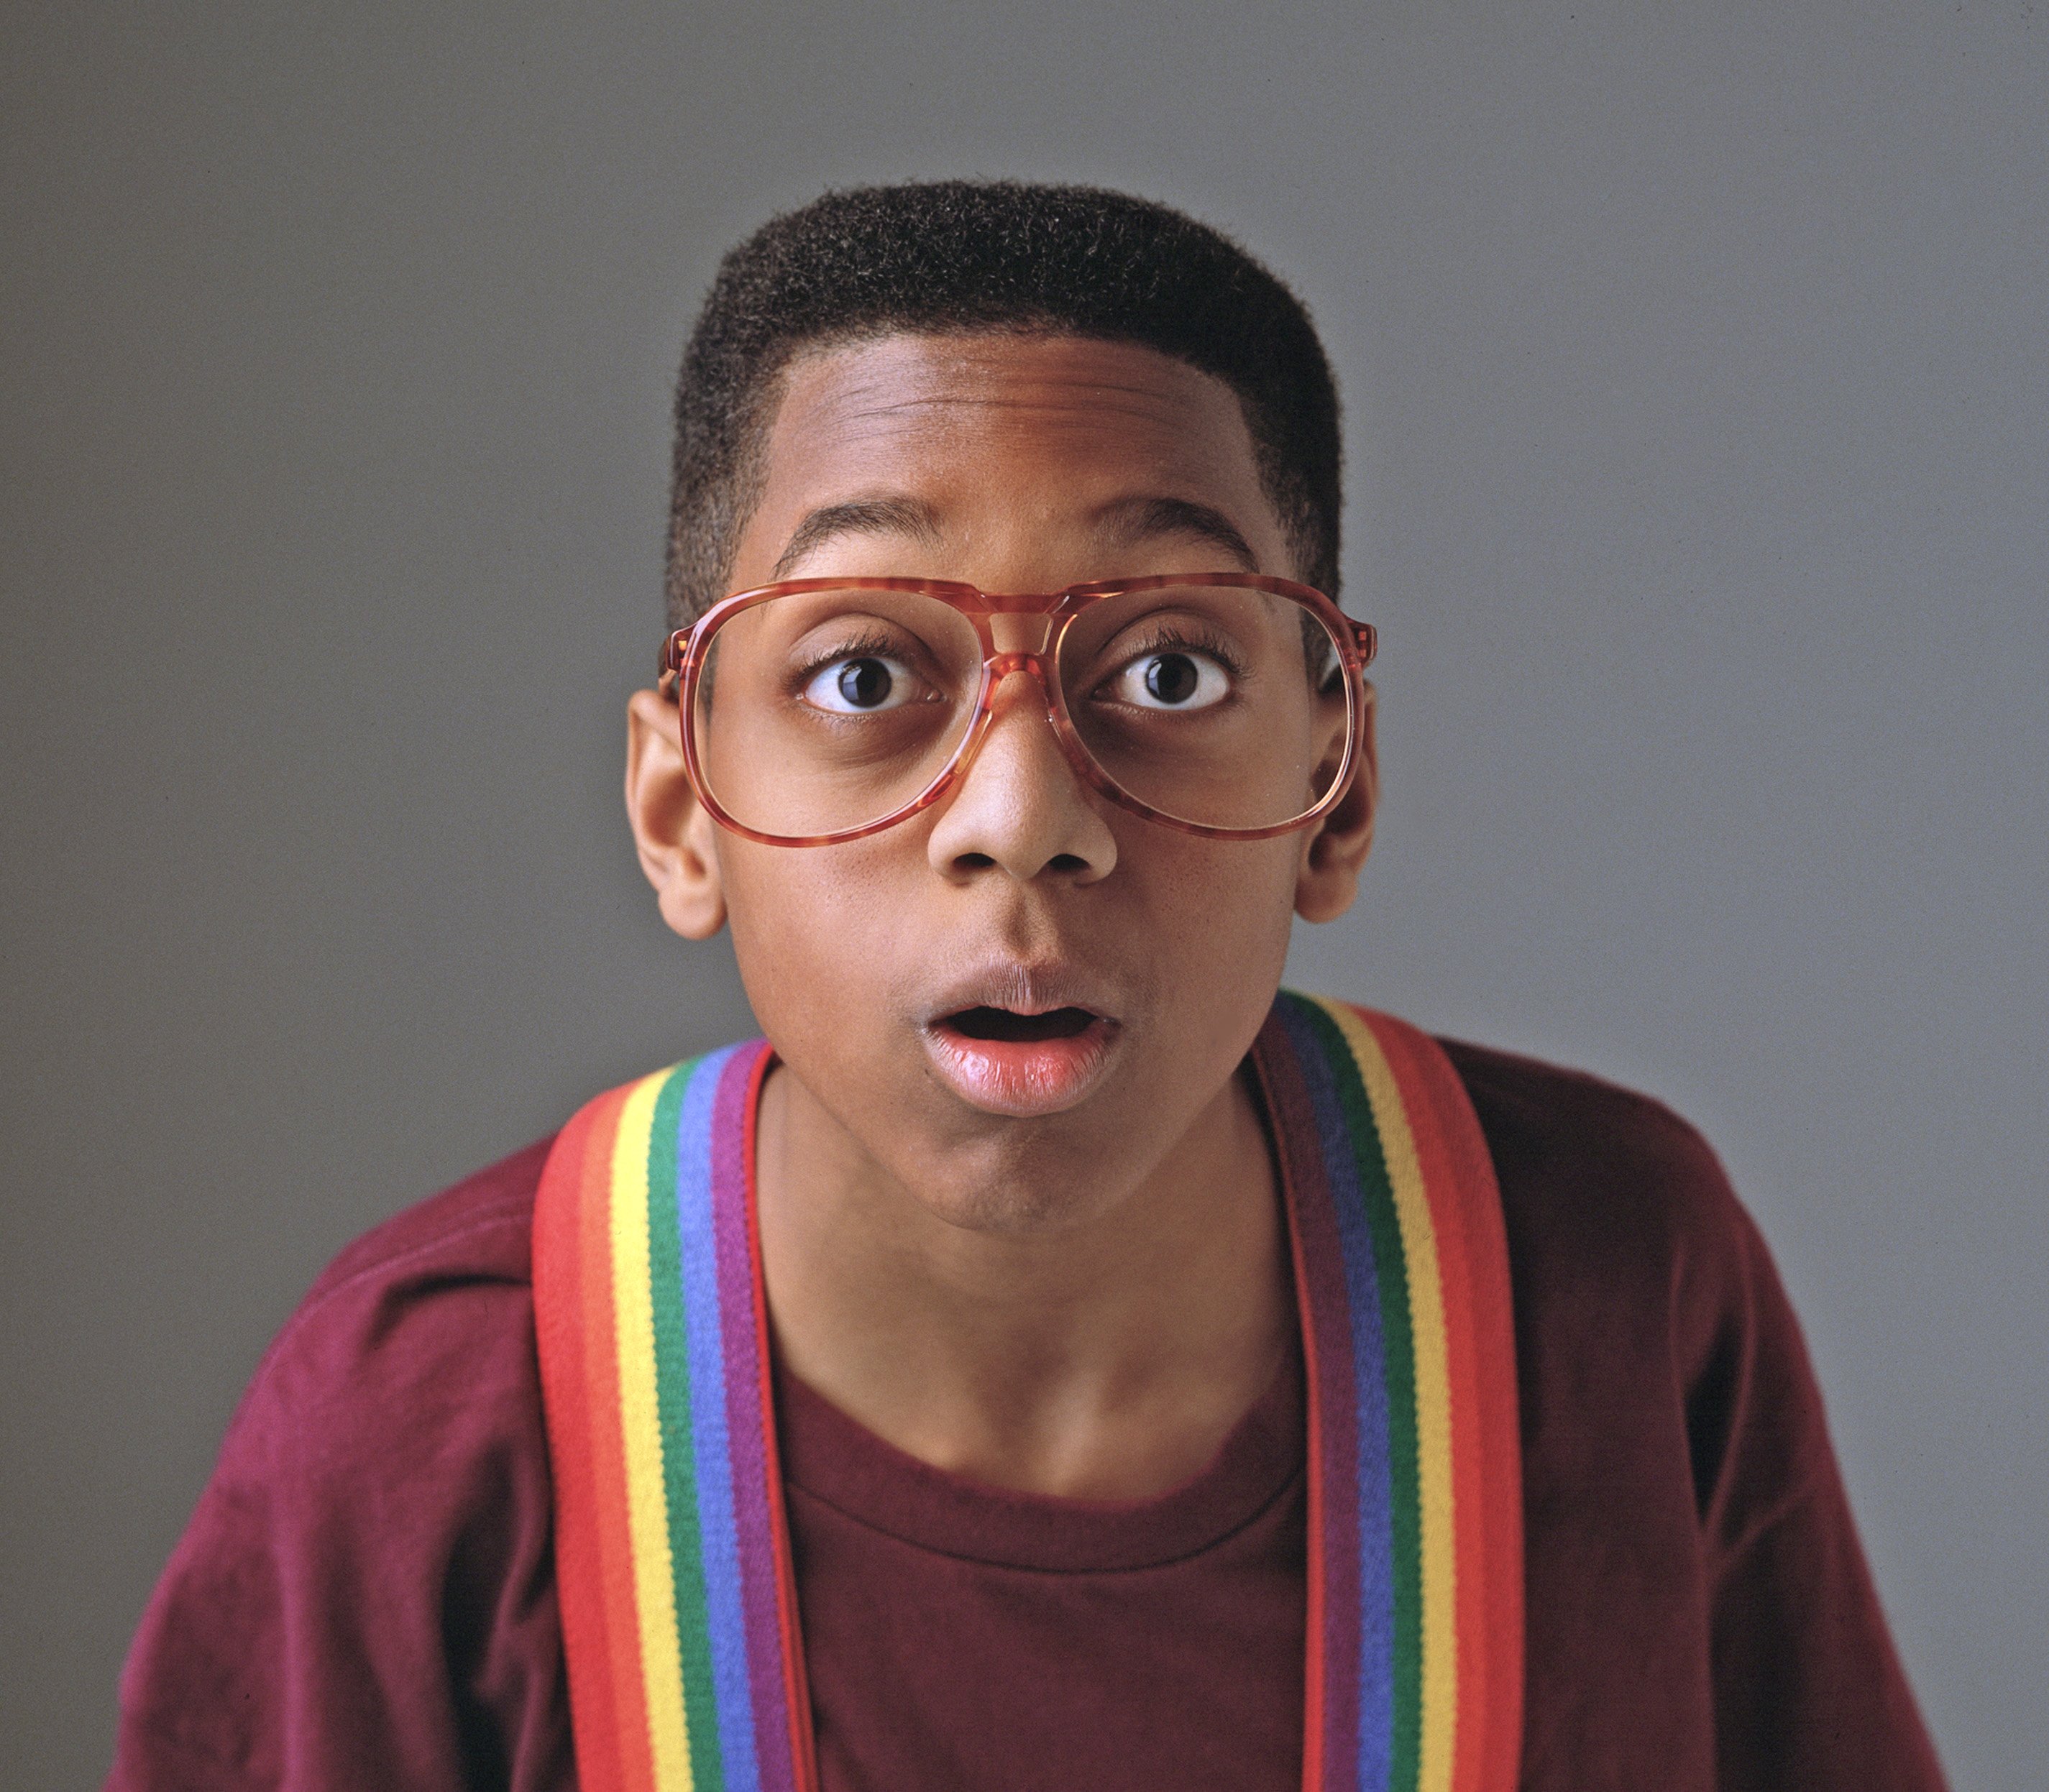 Jaleel White pictured in a promotional poster for Season 2 of “Family Matters” in May 1990. | Source: Getty Images